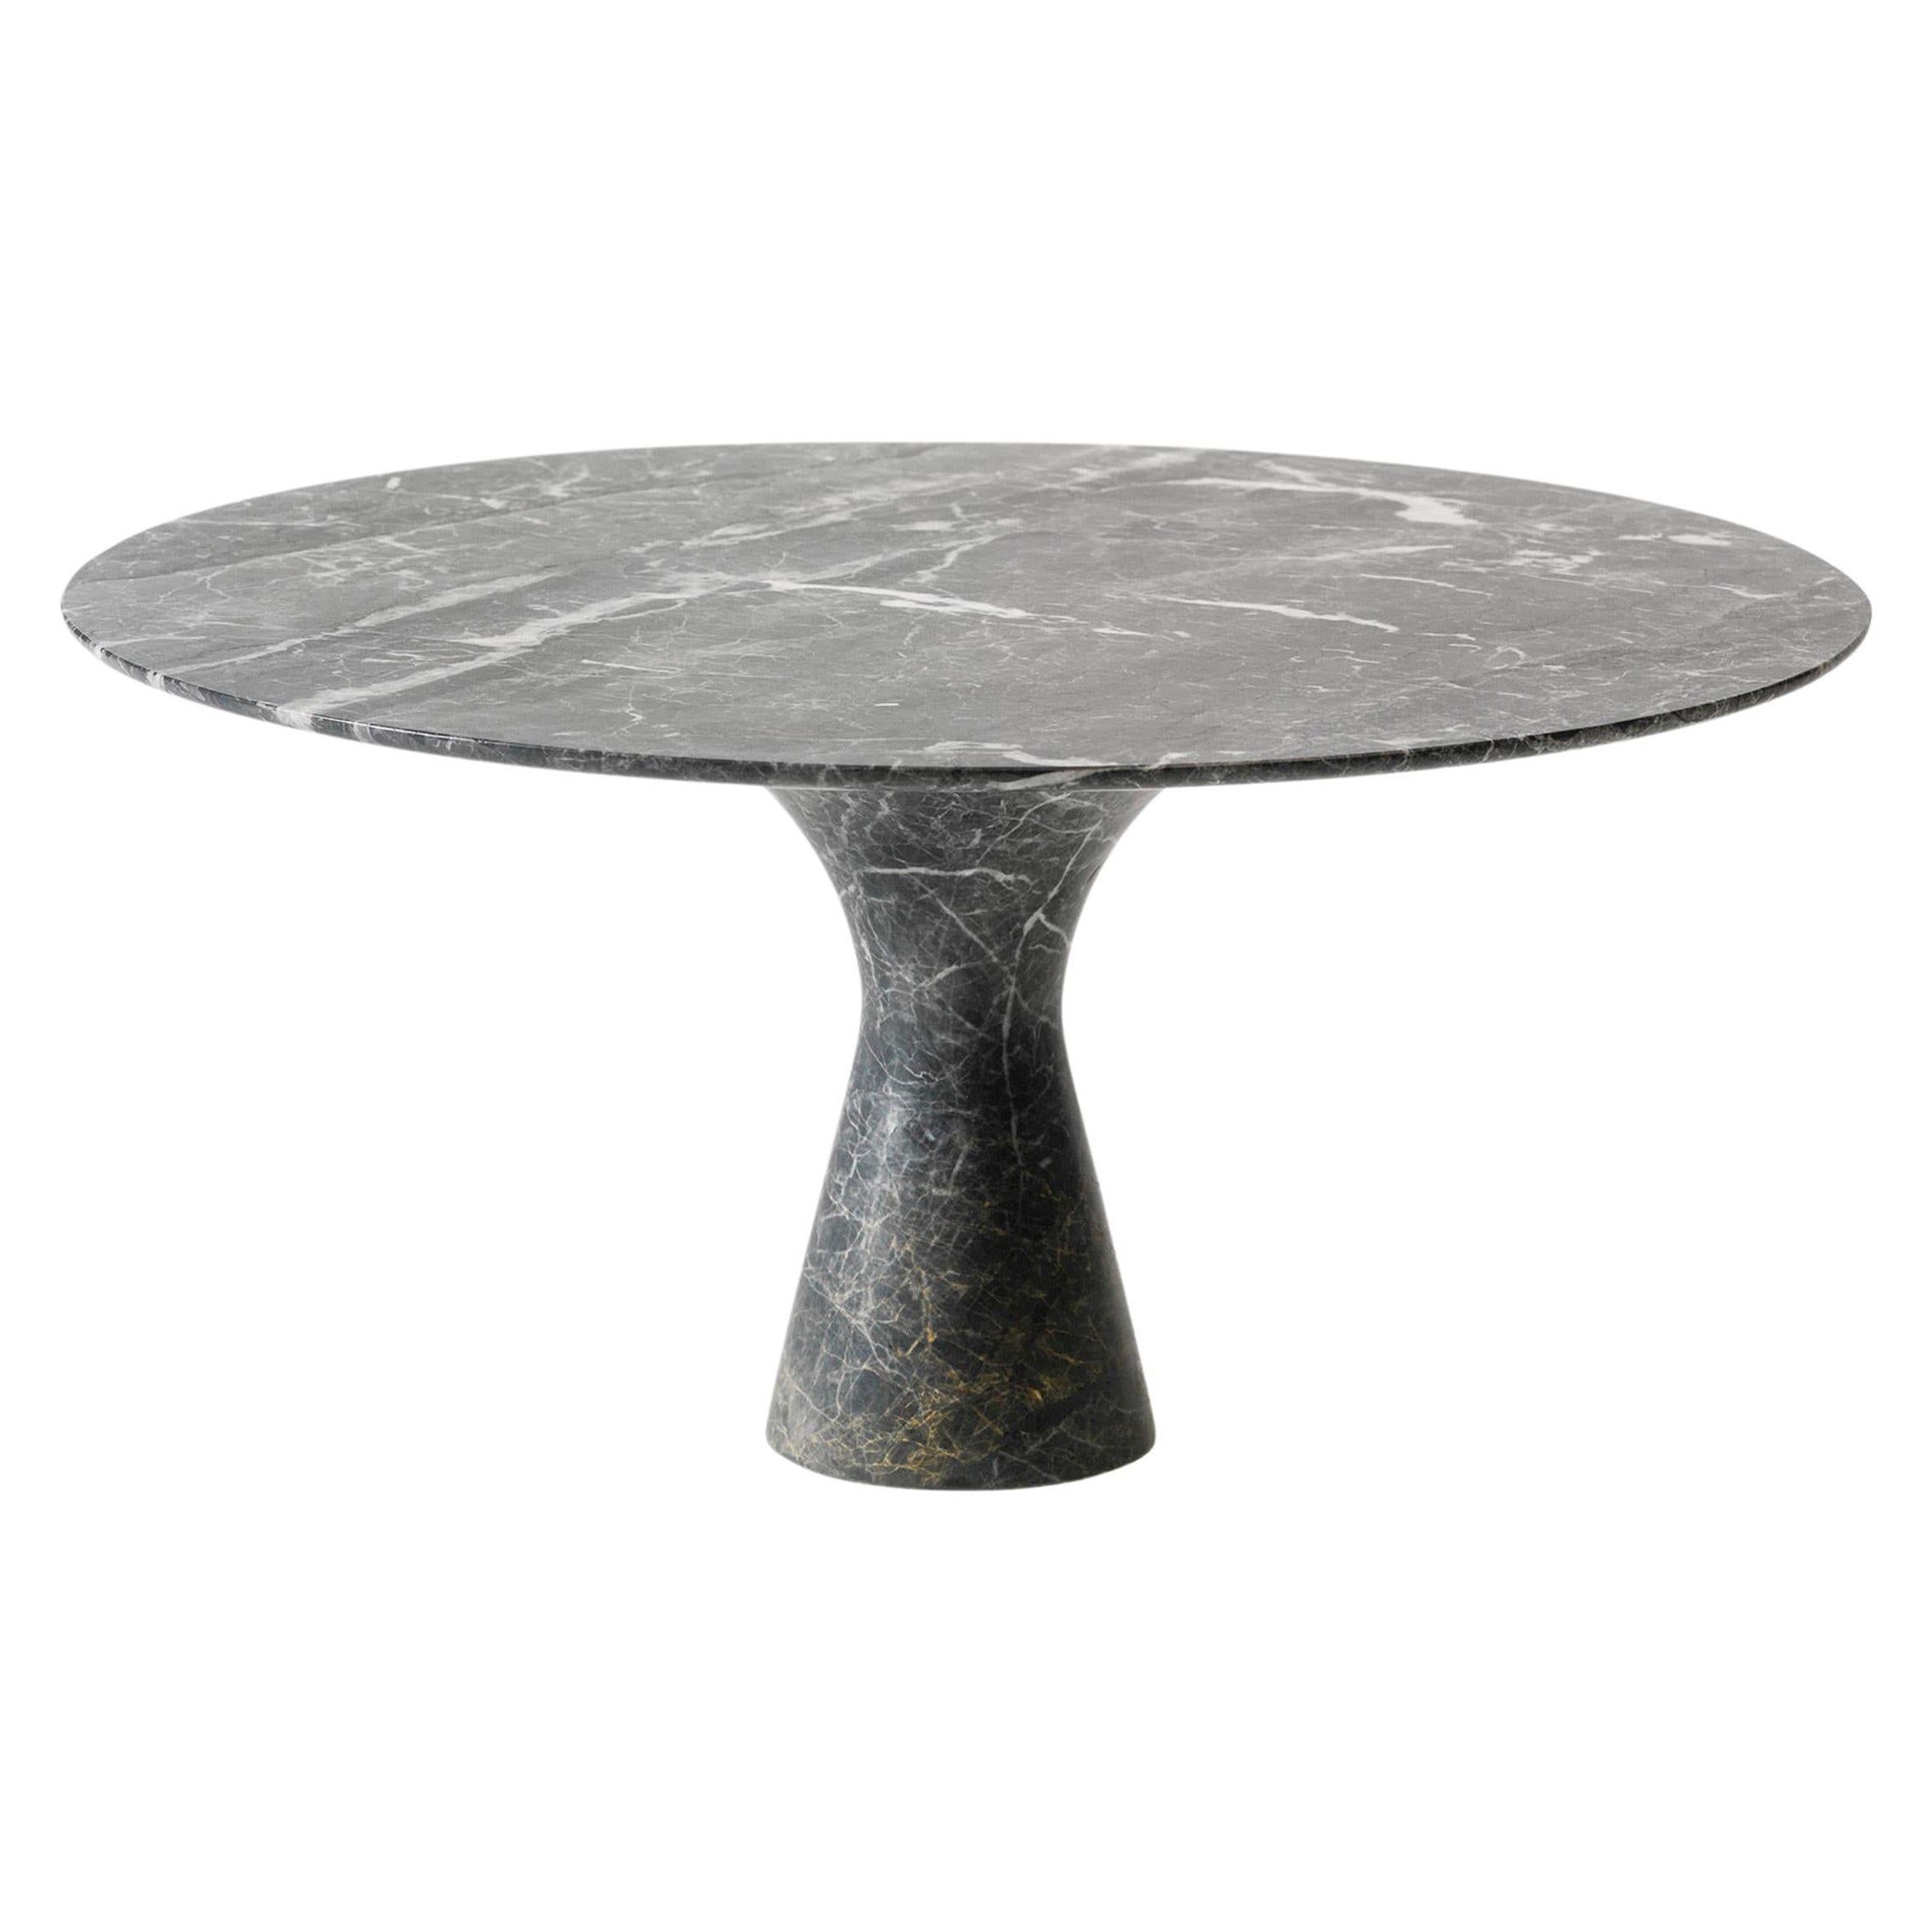 Grey Saint Laurent Refined Contemporary Marble Dining Table 130/75